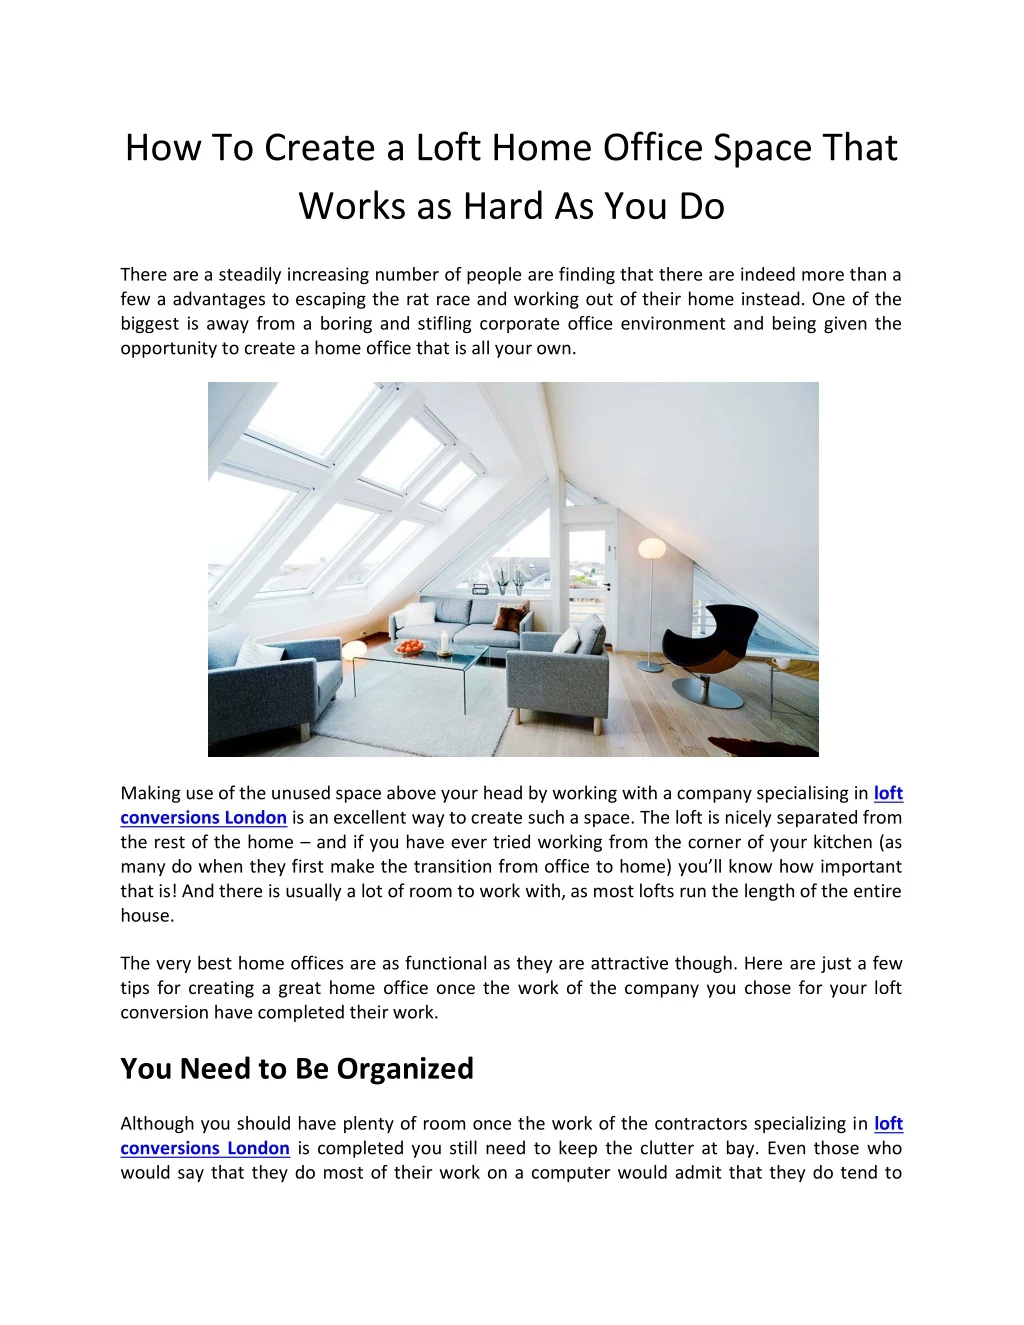 how to create a loft home office space that works